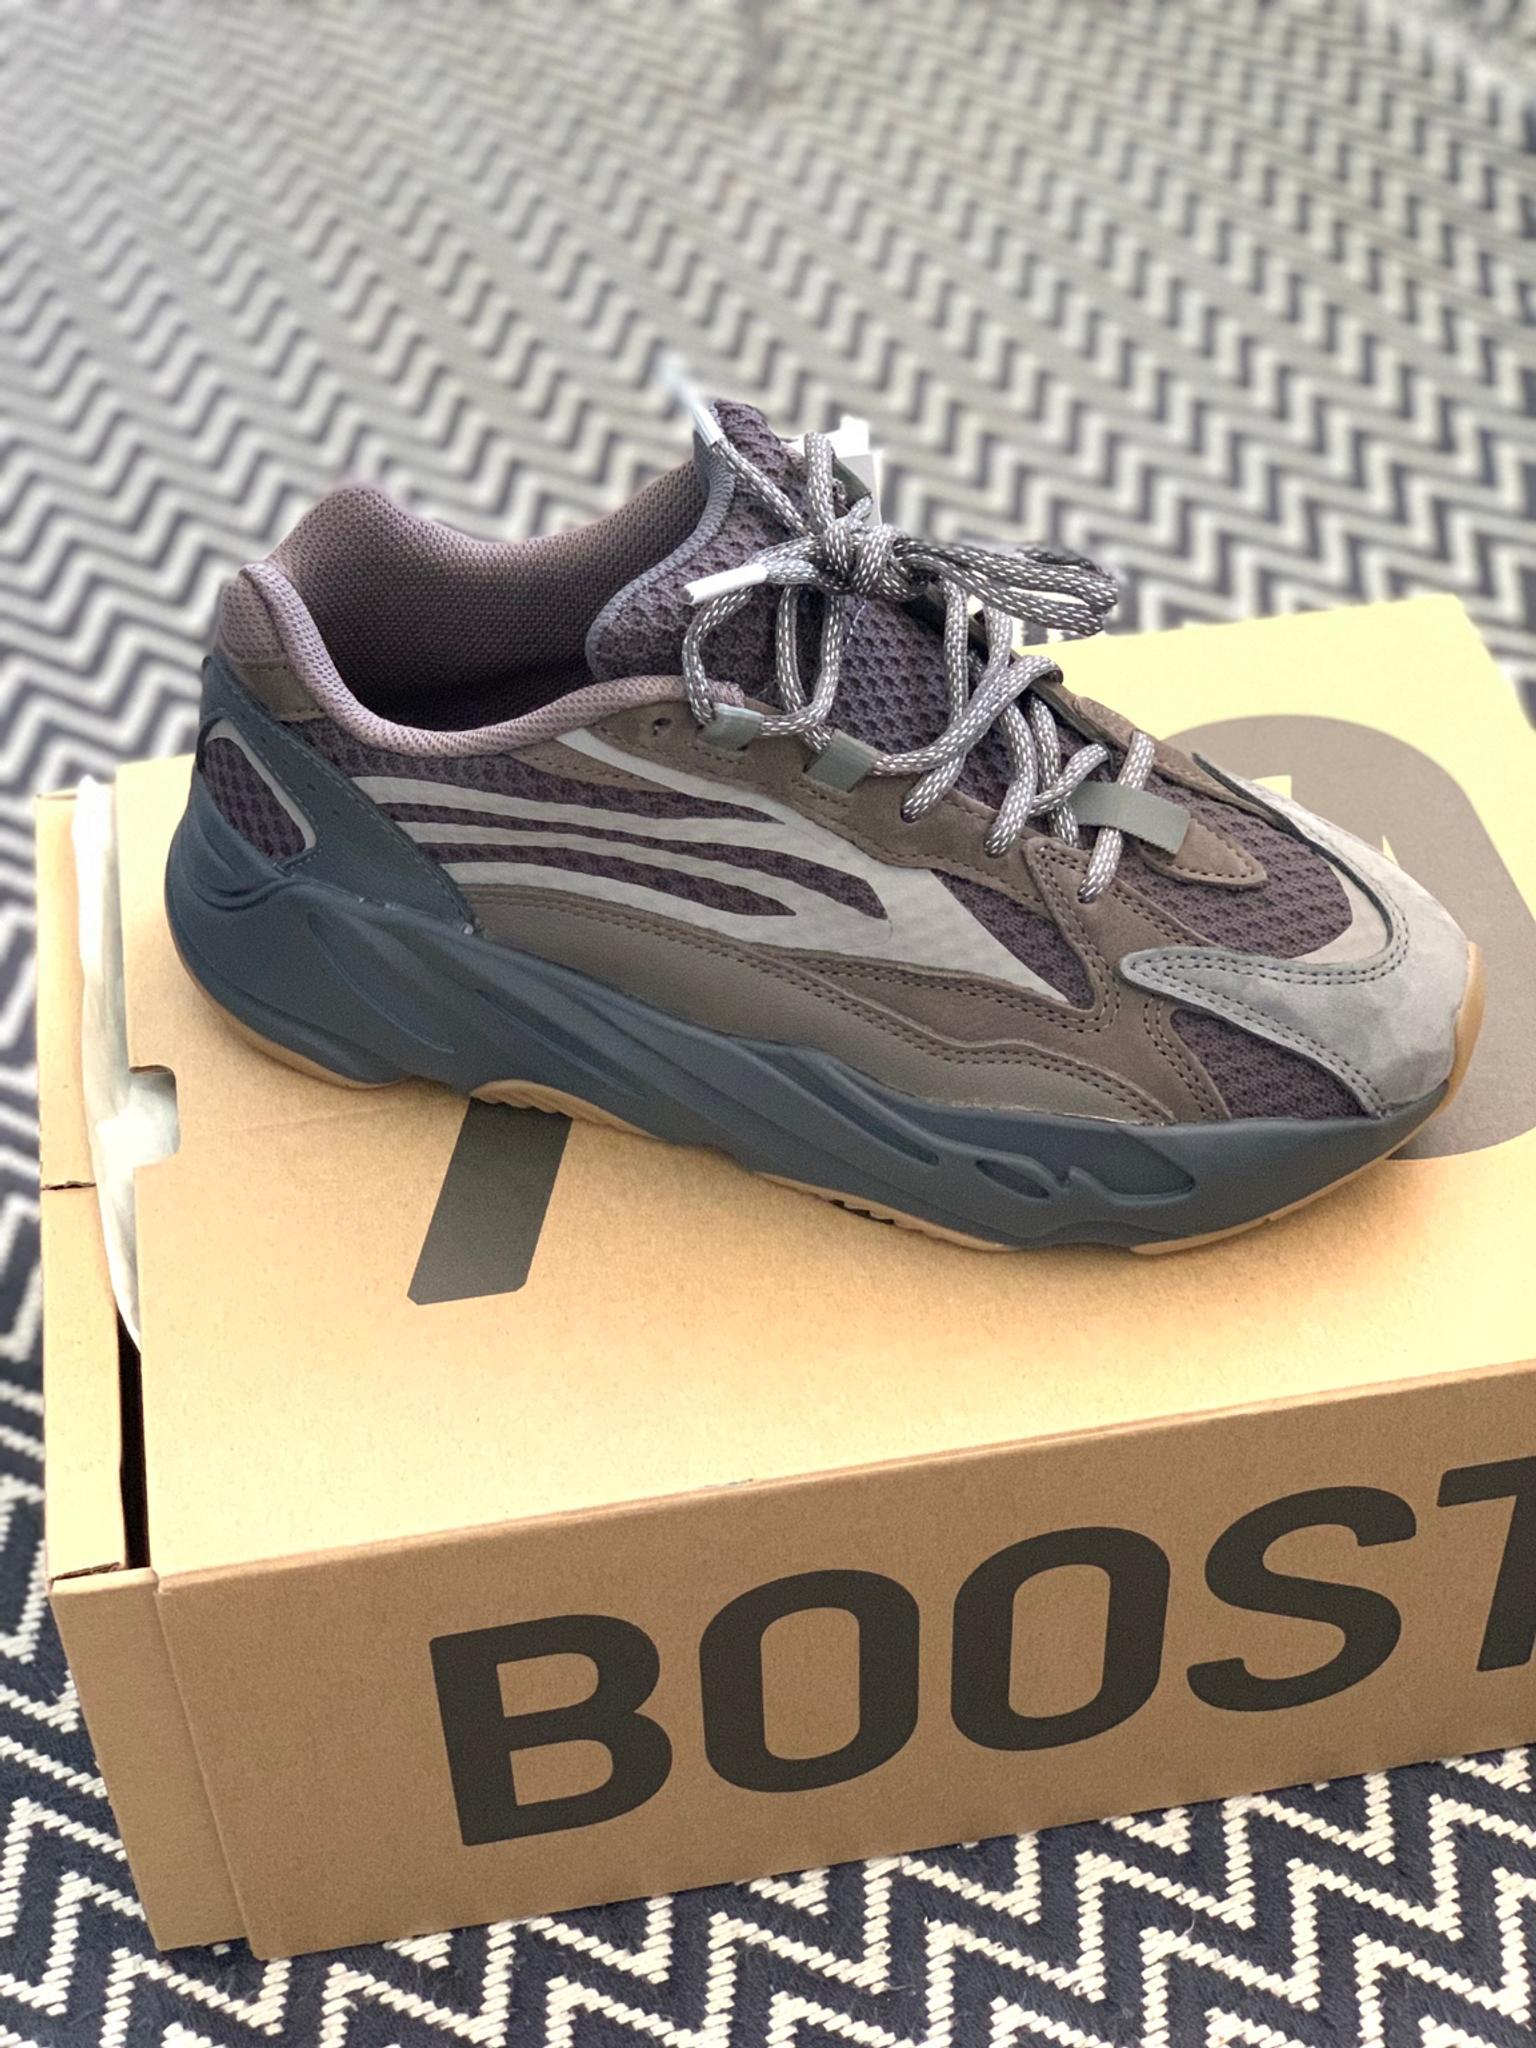 yeezy 700 geode resell